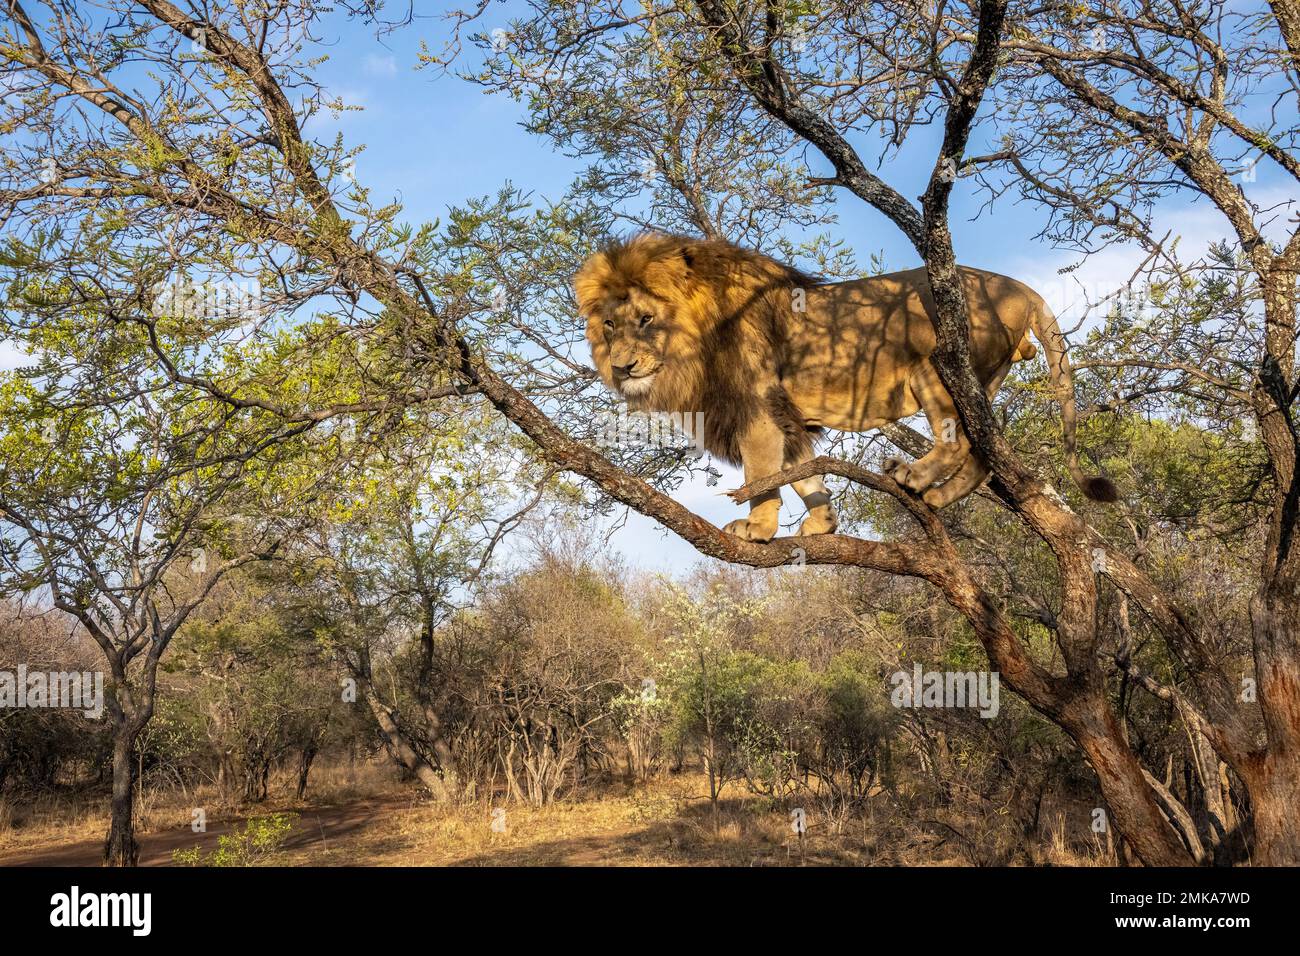 Male Lion in South Africa standing in a Tree Stock Photo